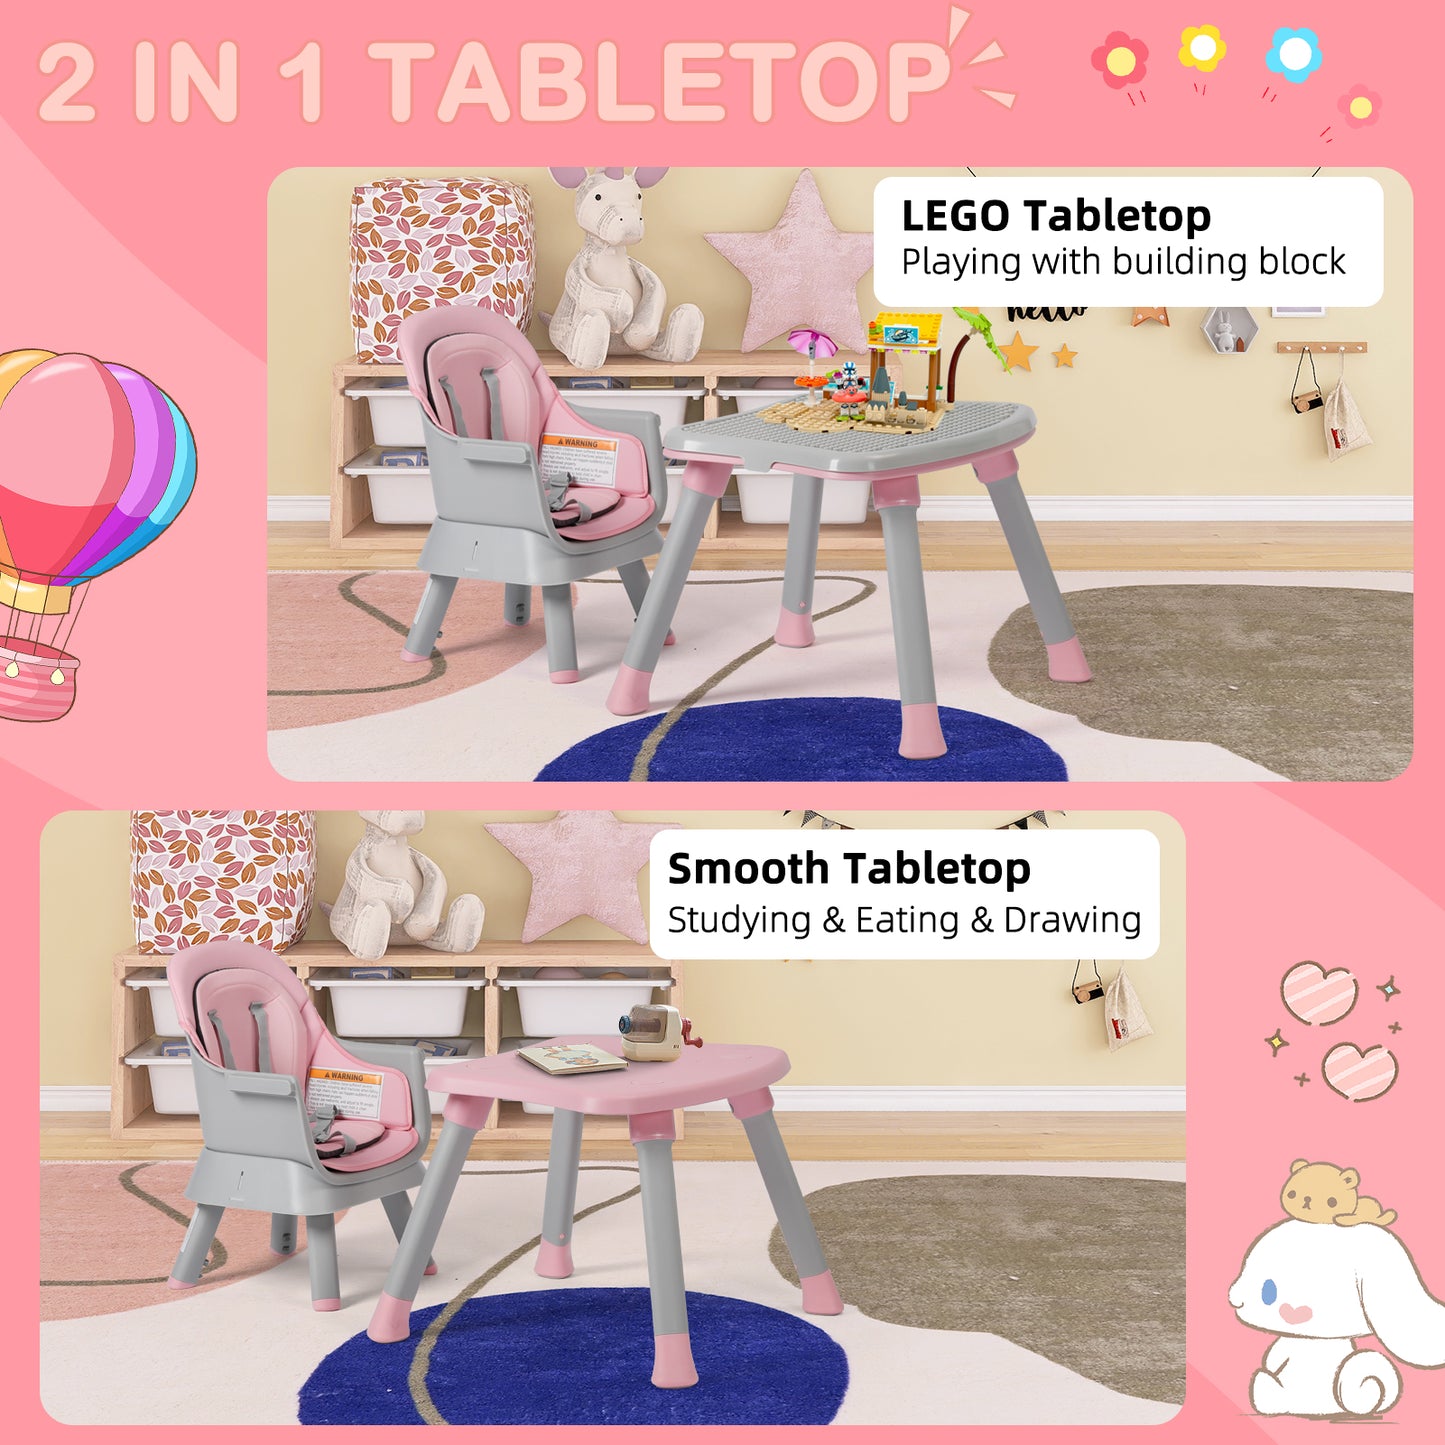 8 in 1 Baby High Chair, Toddler Dining Booster Seat/Kids Table & Chair Set/Building Block Table/Kids Stool, Pink